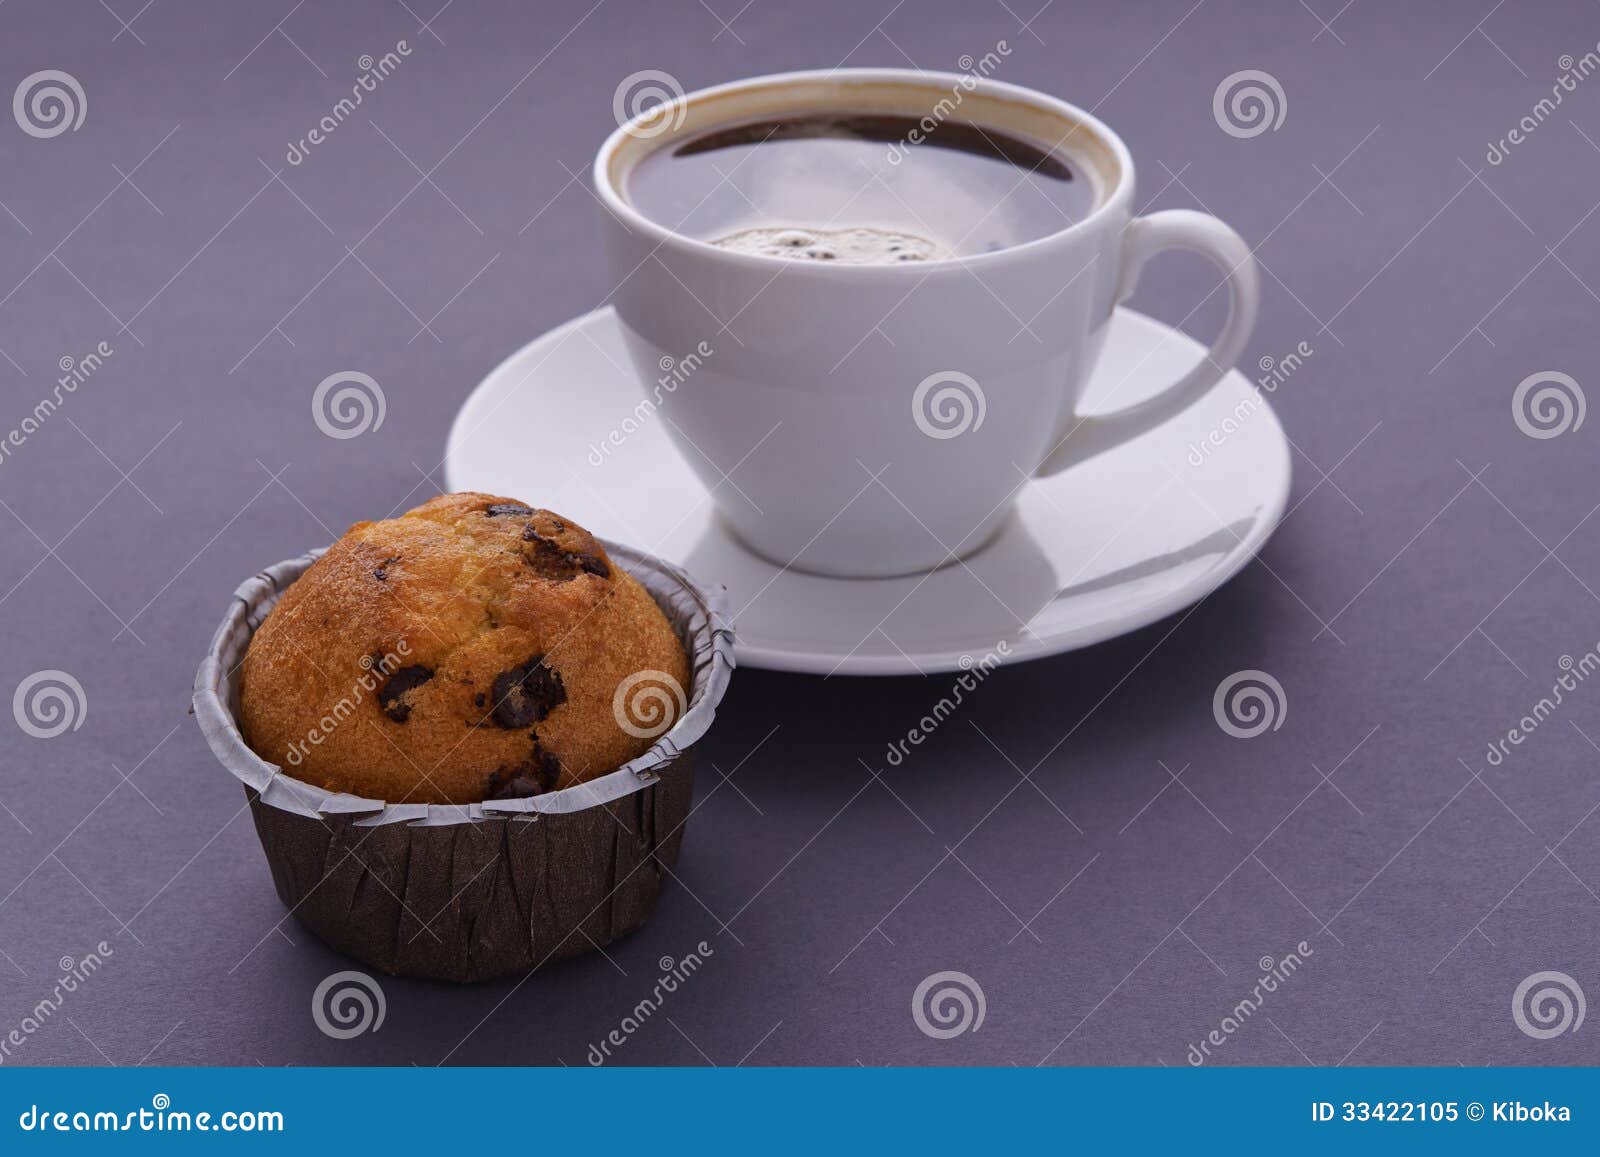 free clipart coffee and muffin - photo #32